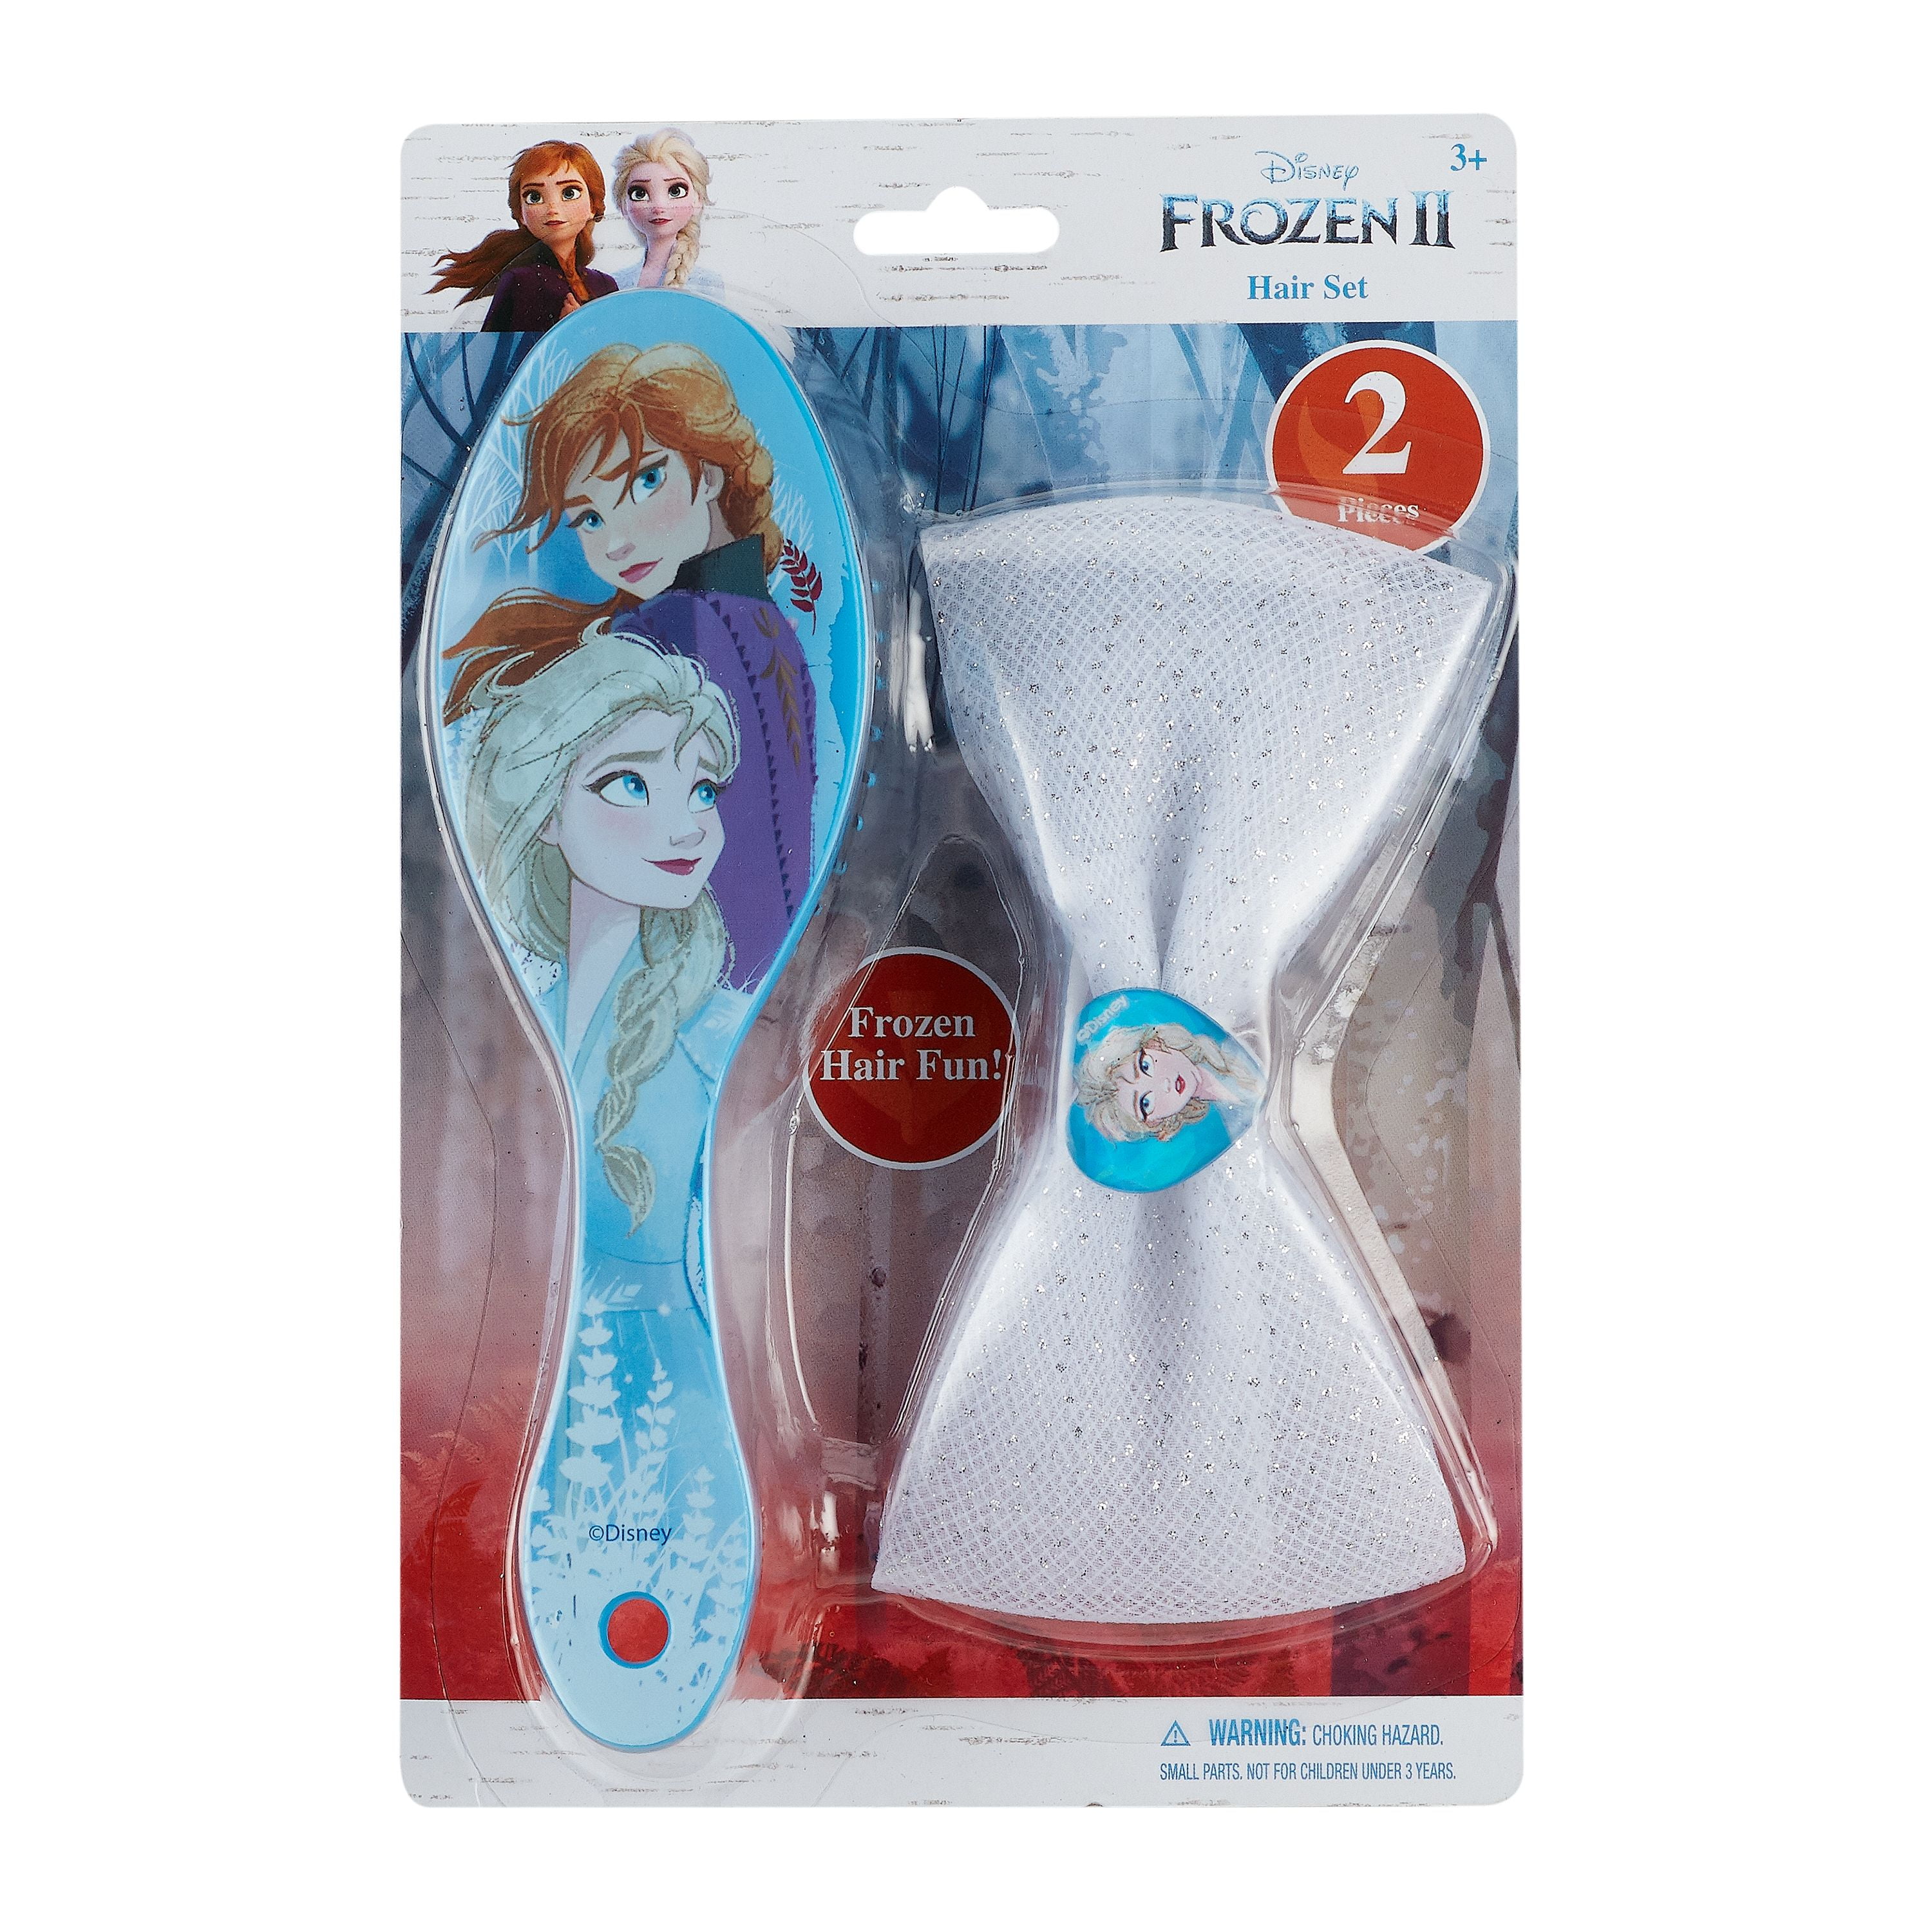 Disney Frozen II 2-Piece Hair Set with Brush and Silver Hair Bow -  